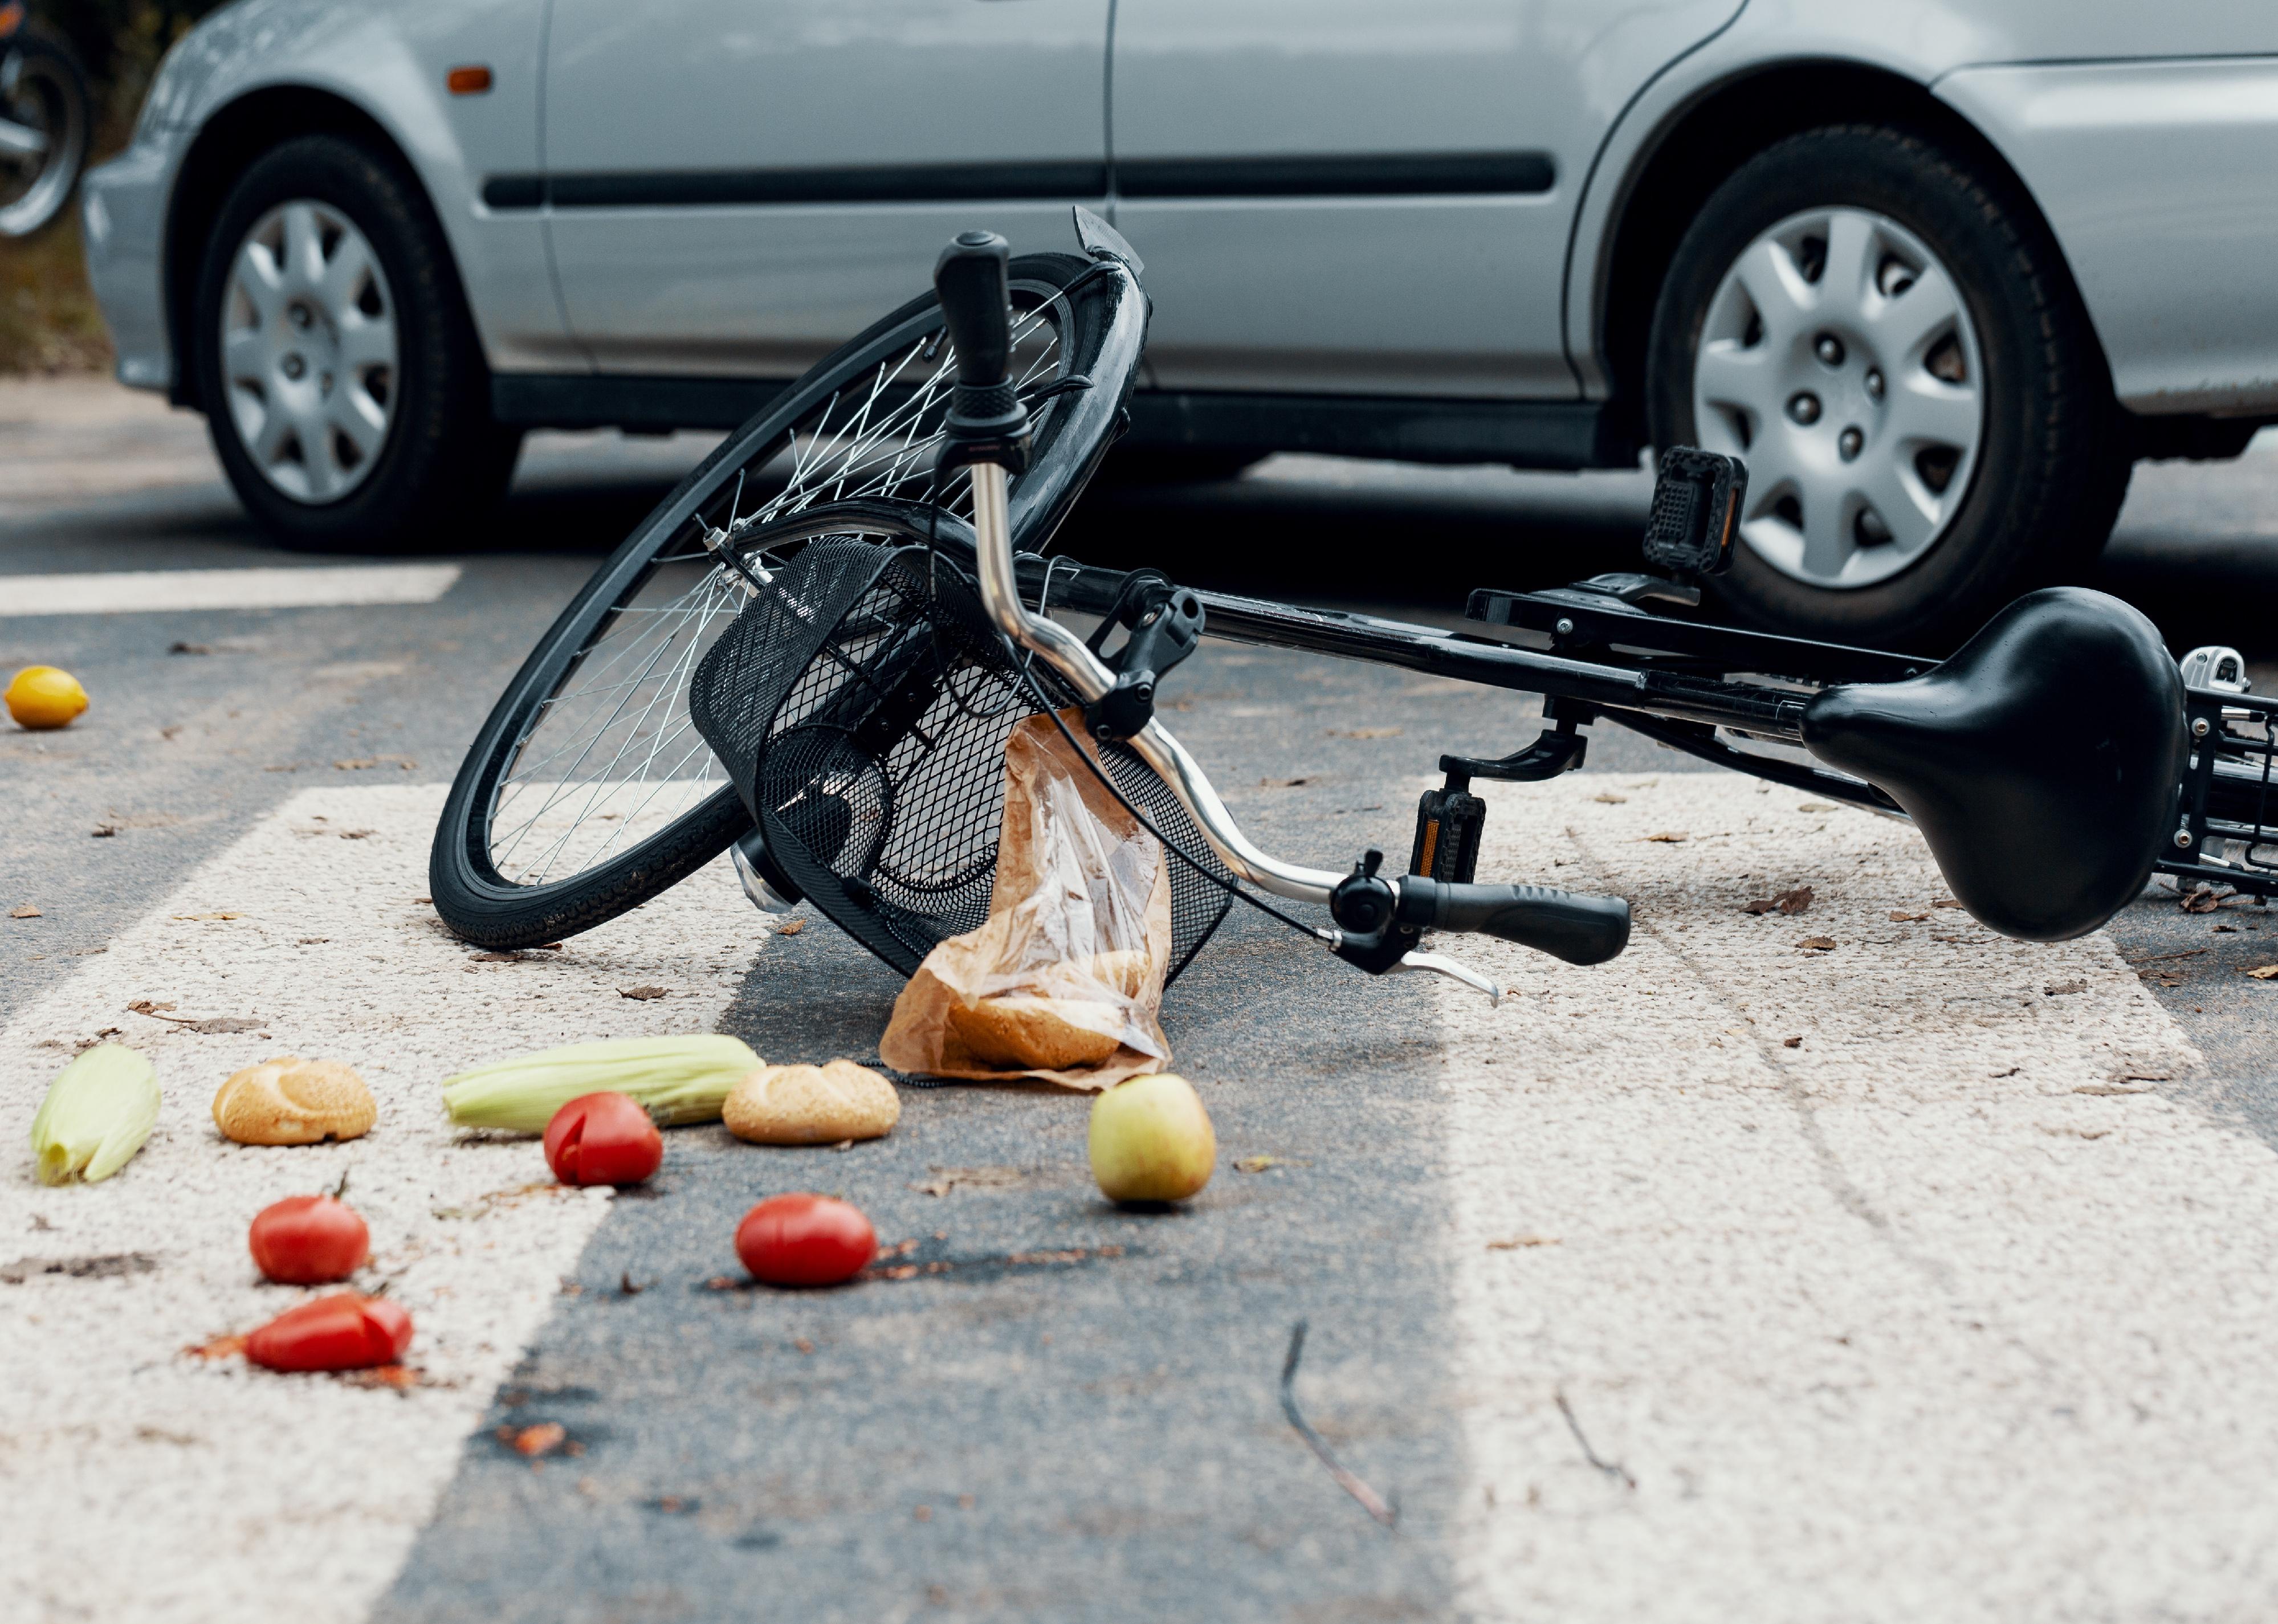 Groceries and broken bike on pedestrian crossing after collision with a car.